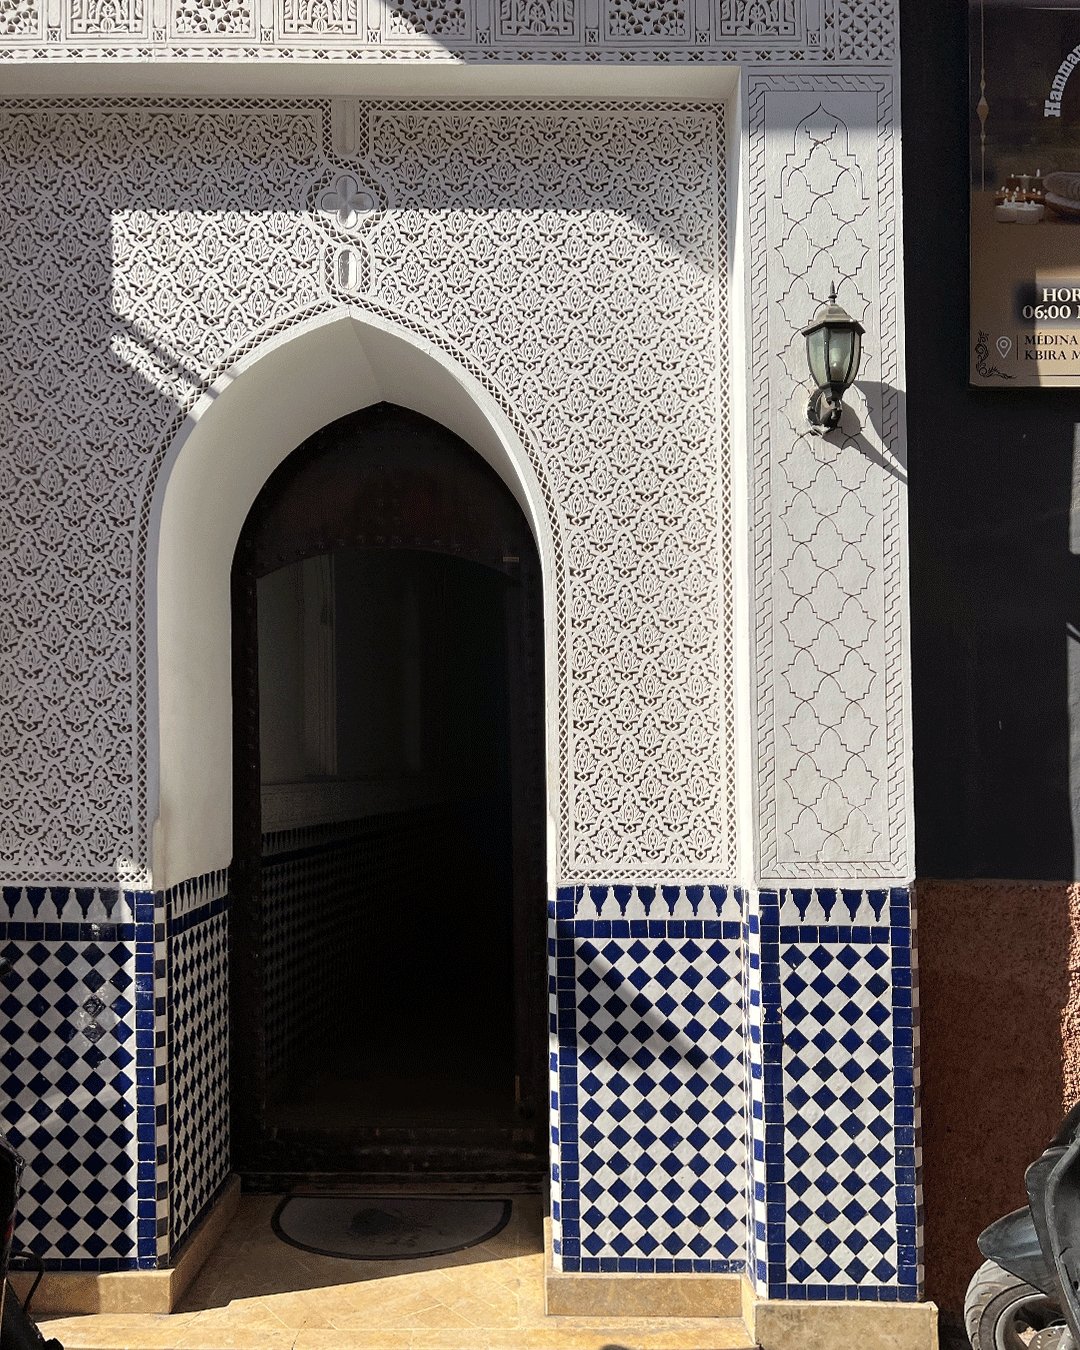 What to do in Marrakech